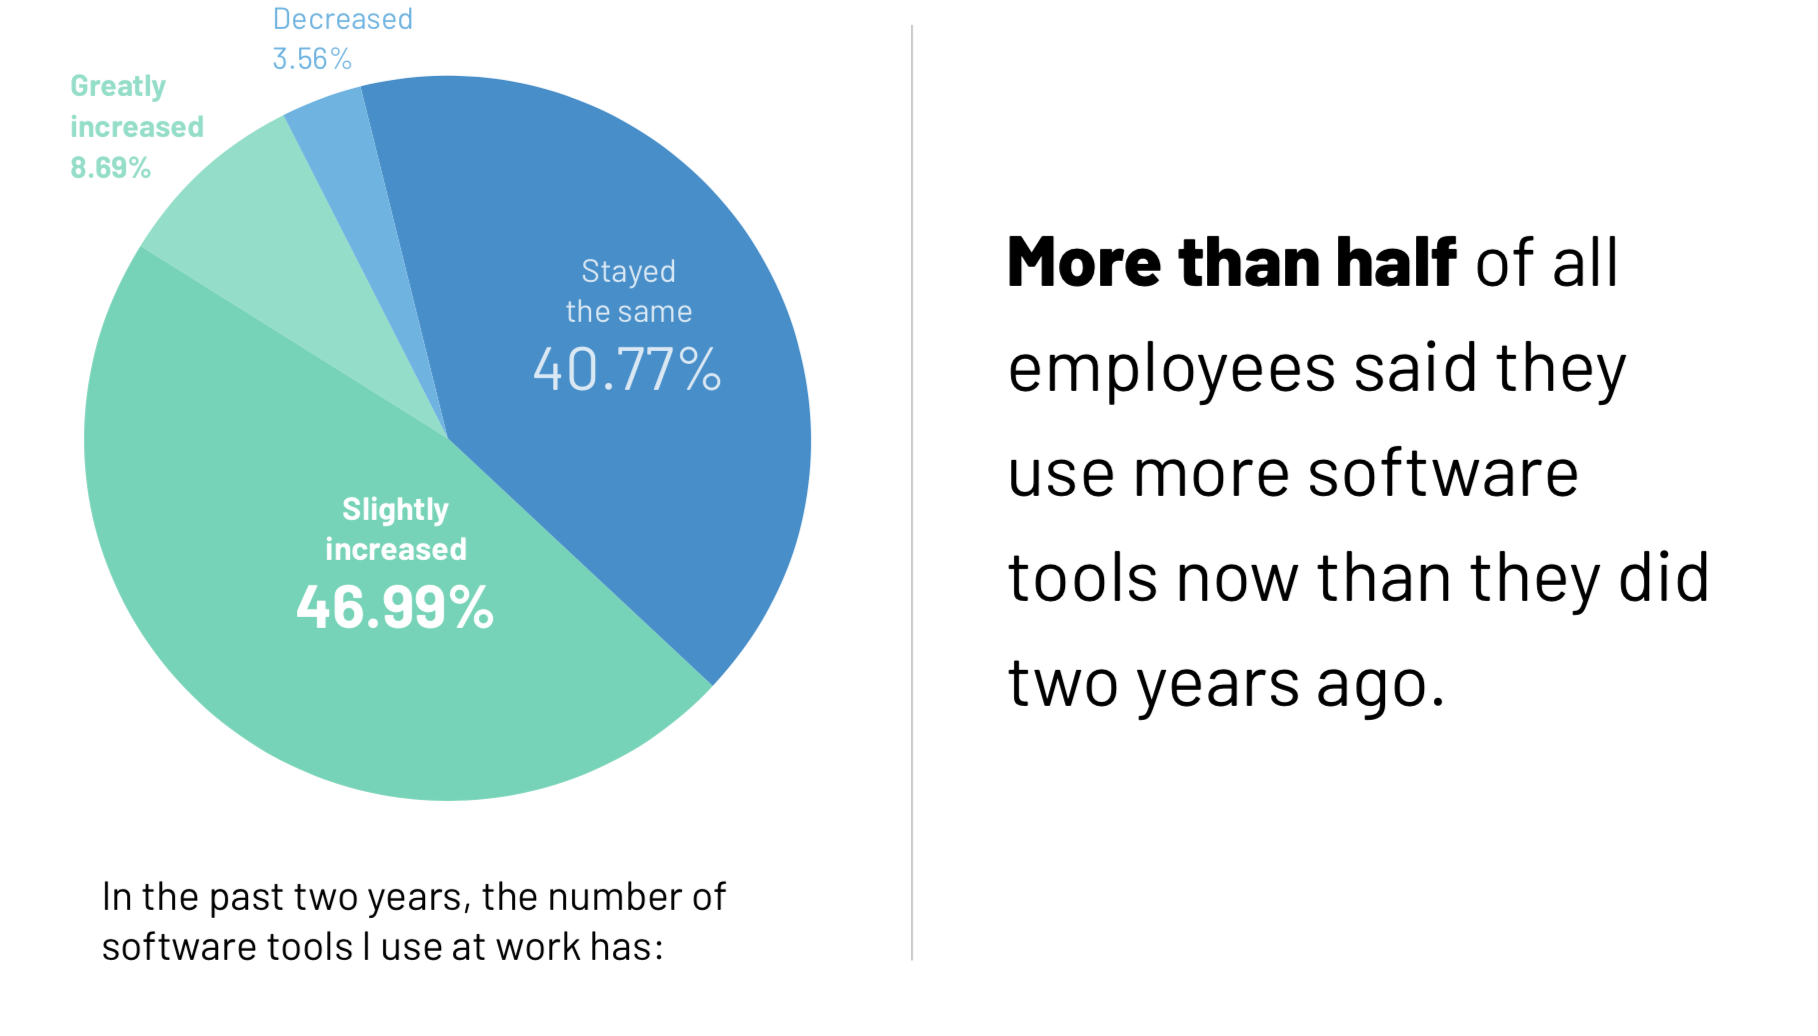 Employees use more software